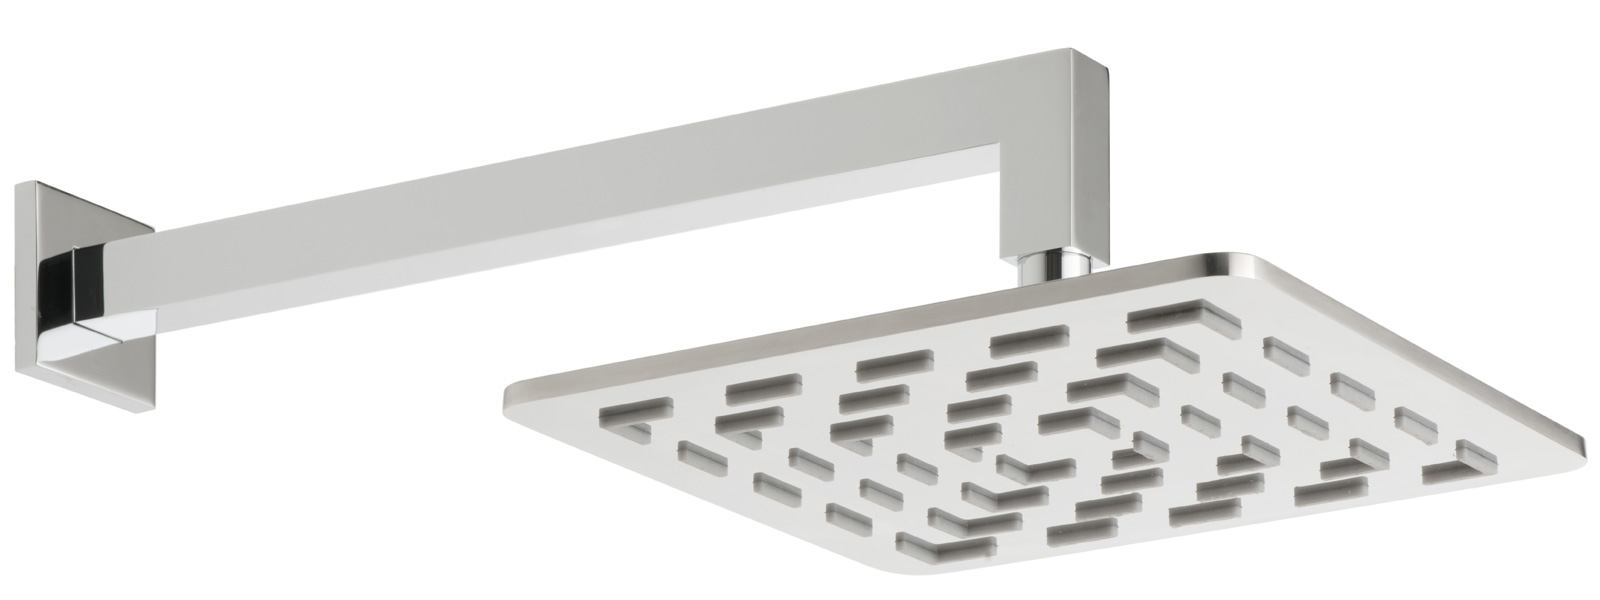 Vado launches Geometry shower heads